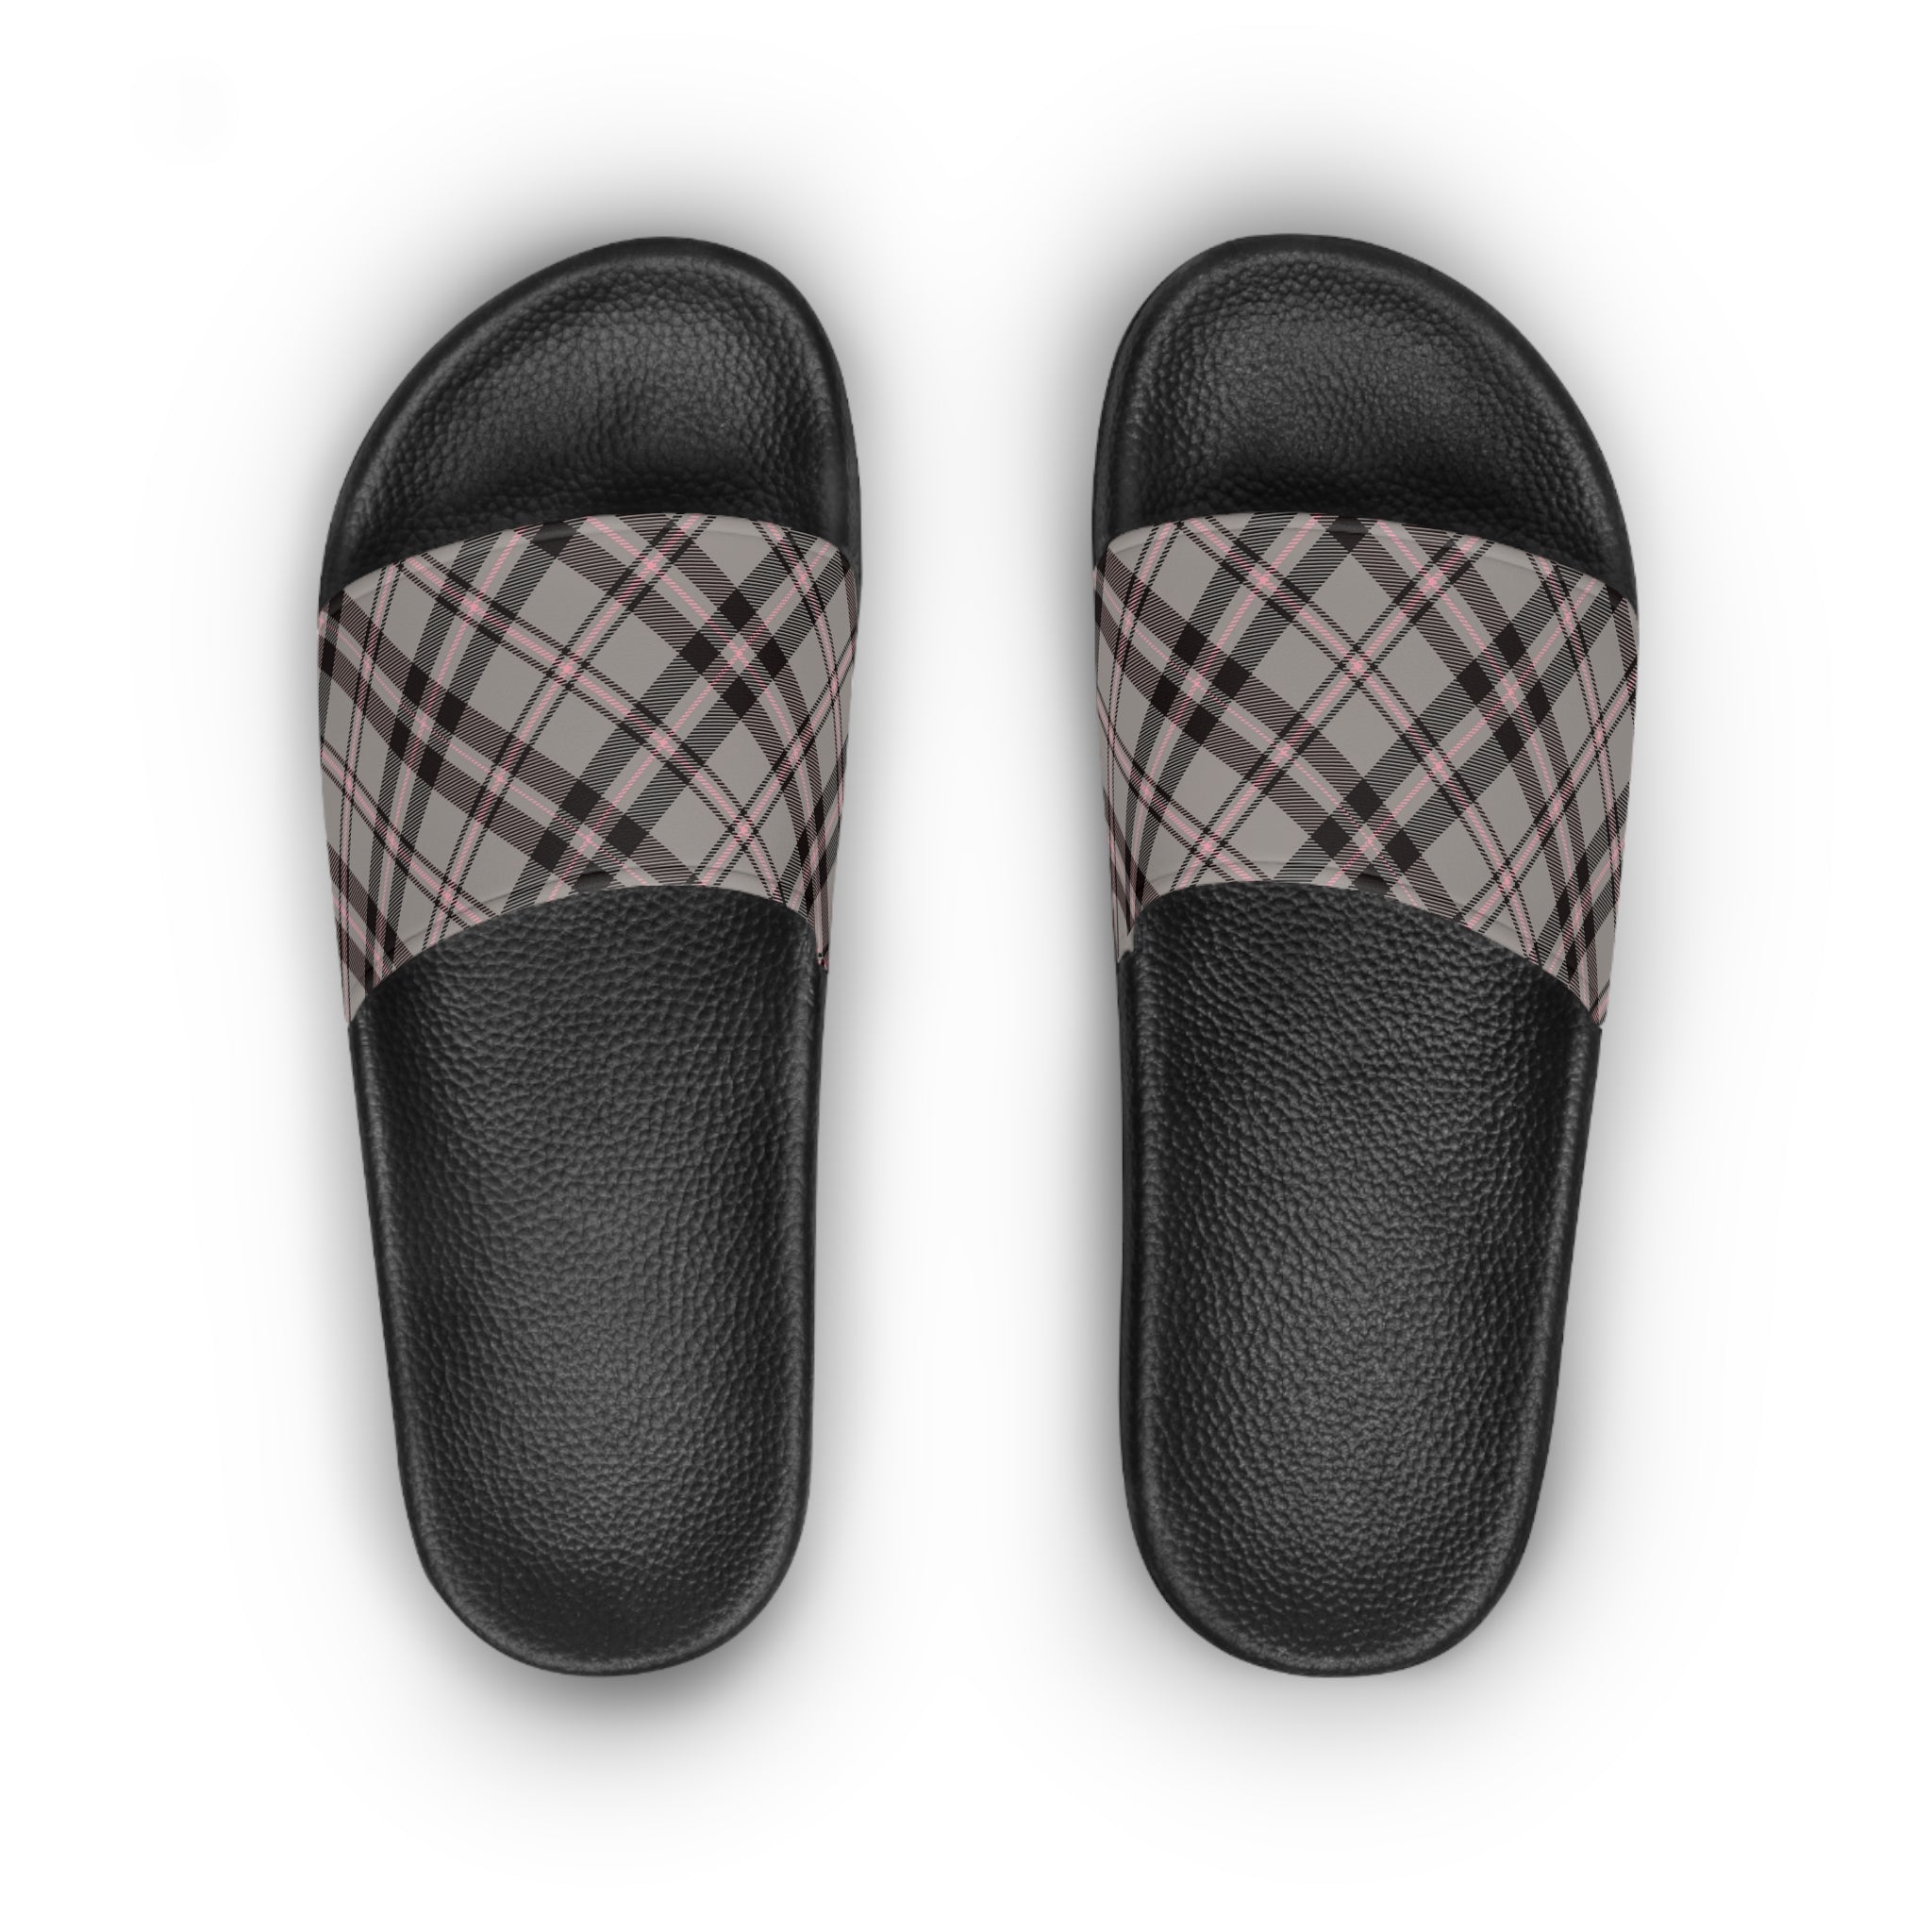  Abby Pattern in Gray and Pink Women's Slide Sandals, Slide Sandals for Women, Plaid Slip Ons ShoesBlacksoleUS7